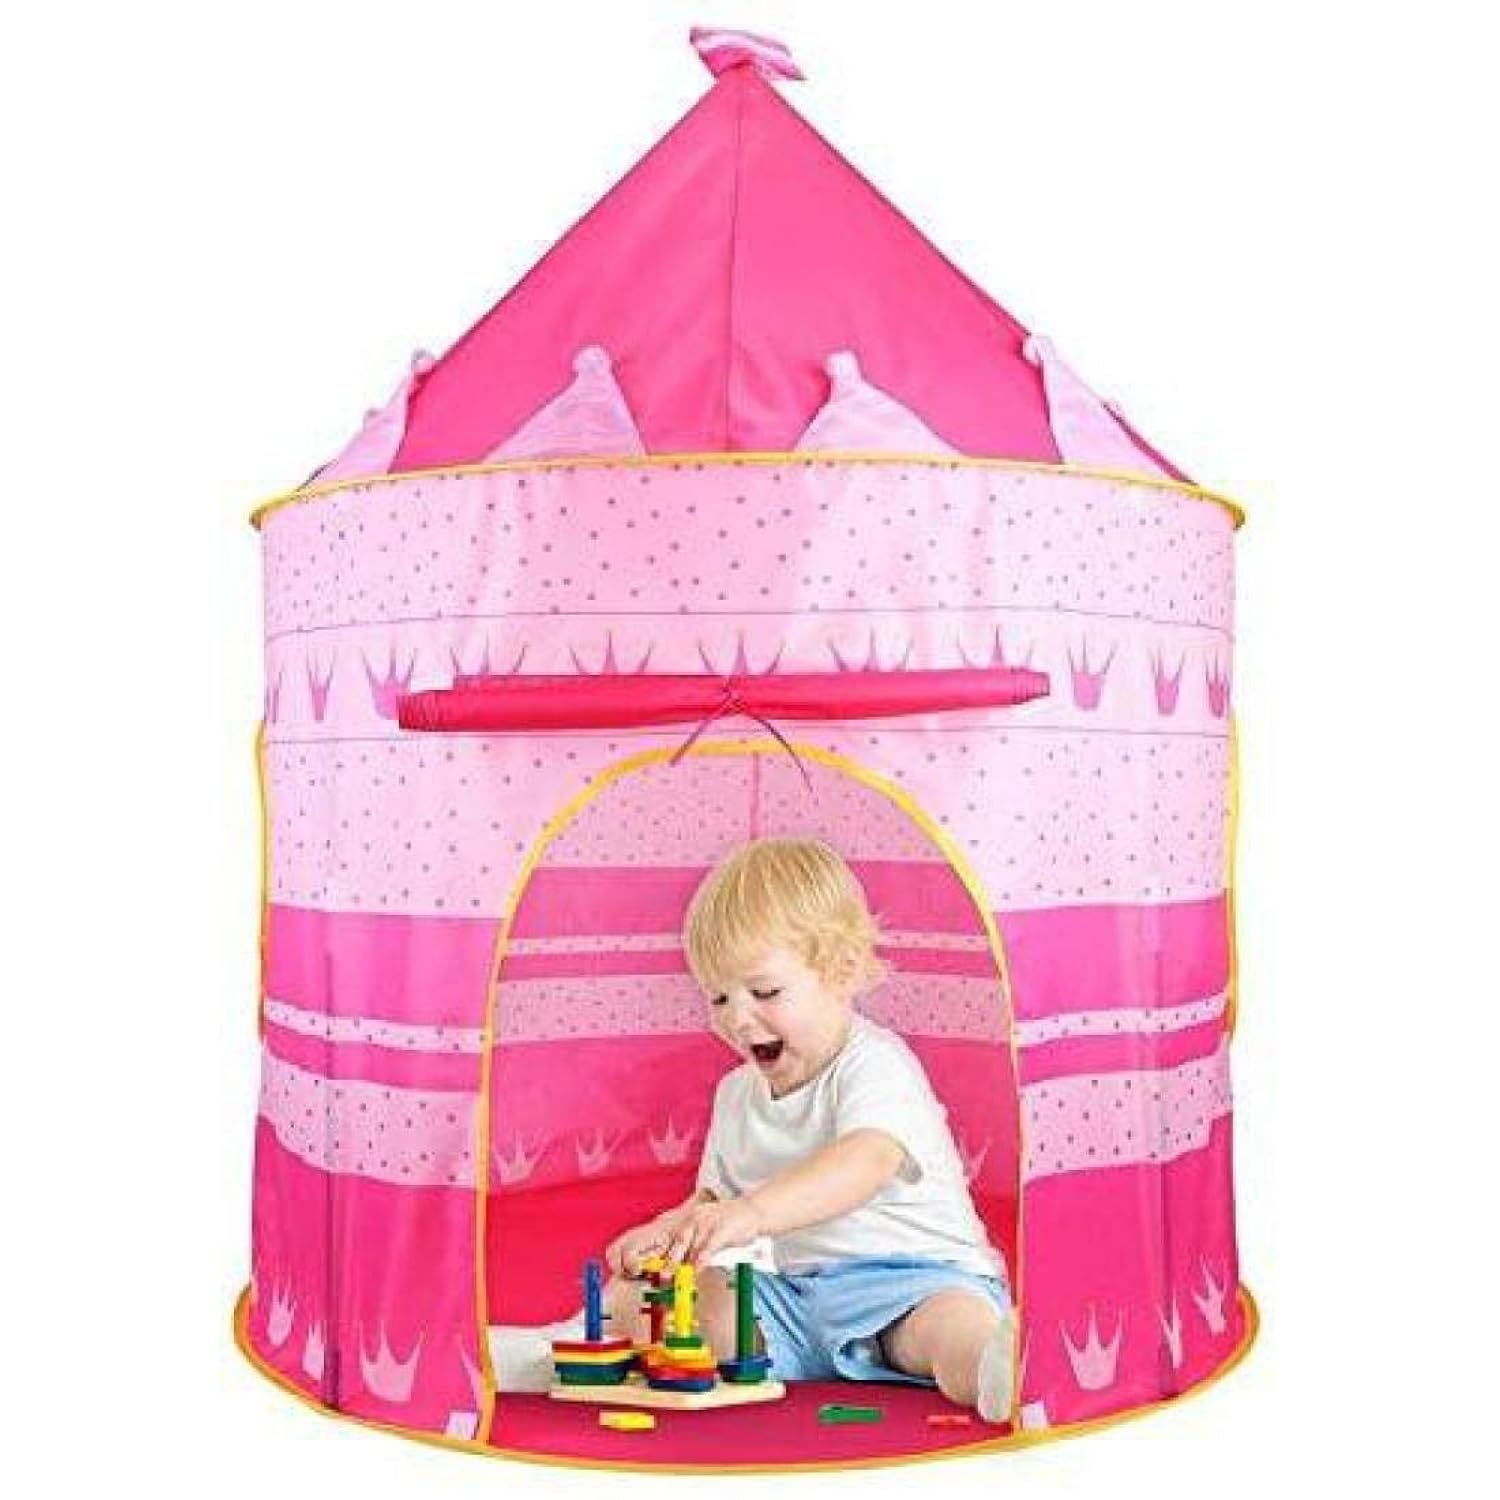 Great Choice Products Kids Tent Toy Princess Playhouse - Toddler Play House Pink Castle For Kid Children Girls Boys Baby Indoor & Outdoor Toys F